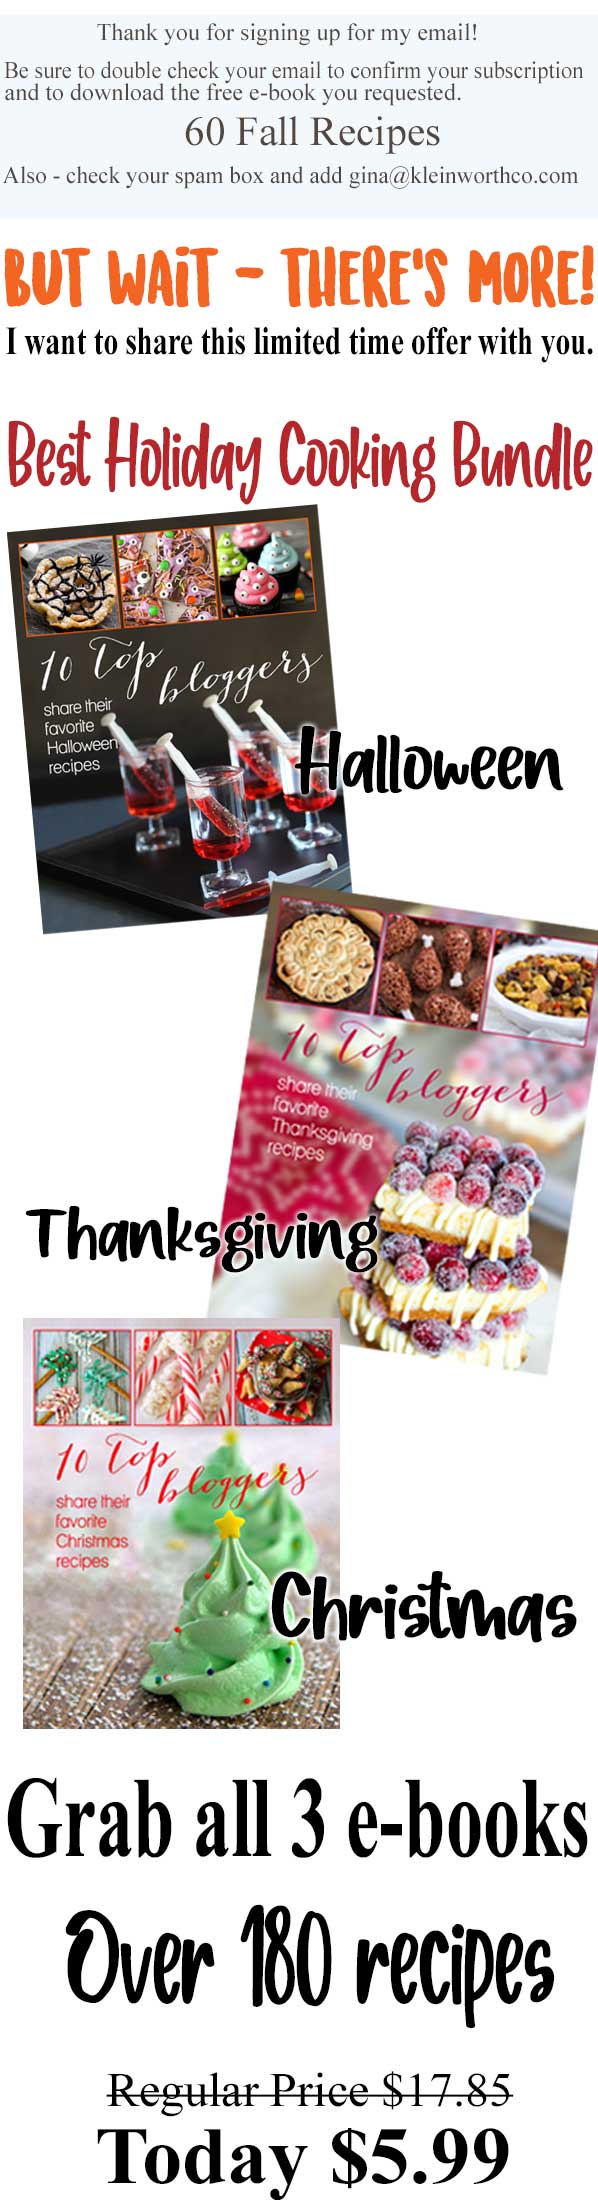 Best Holiday Cooking Bundle